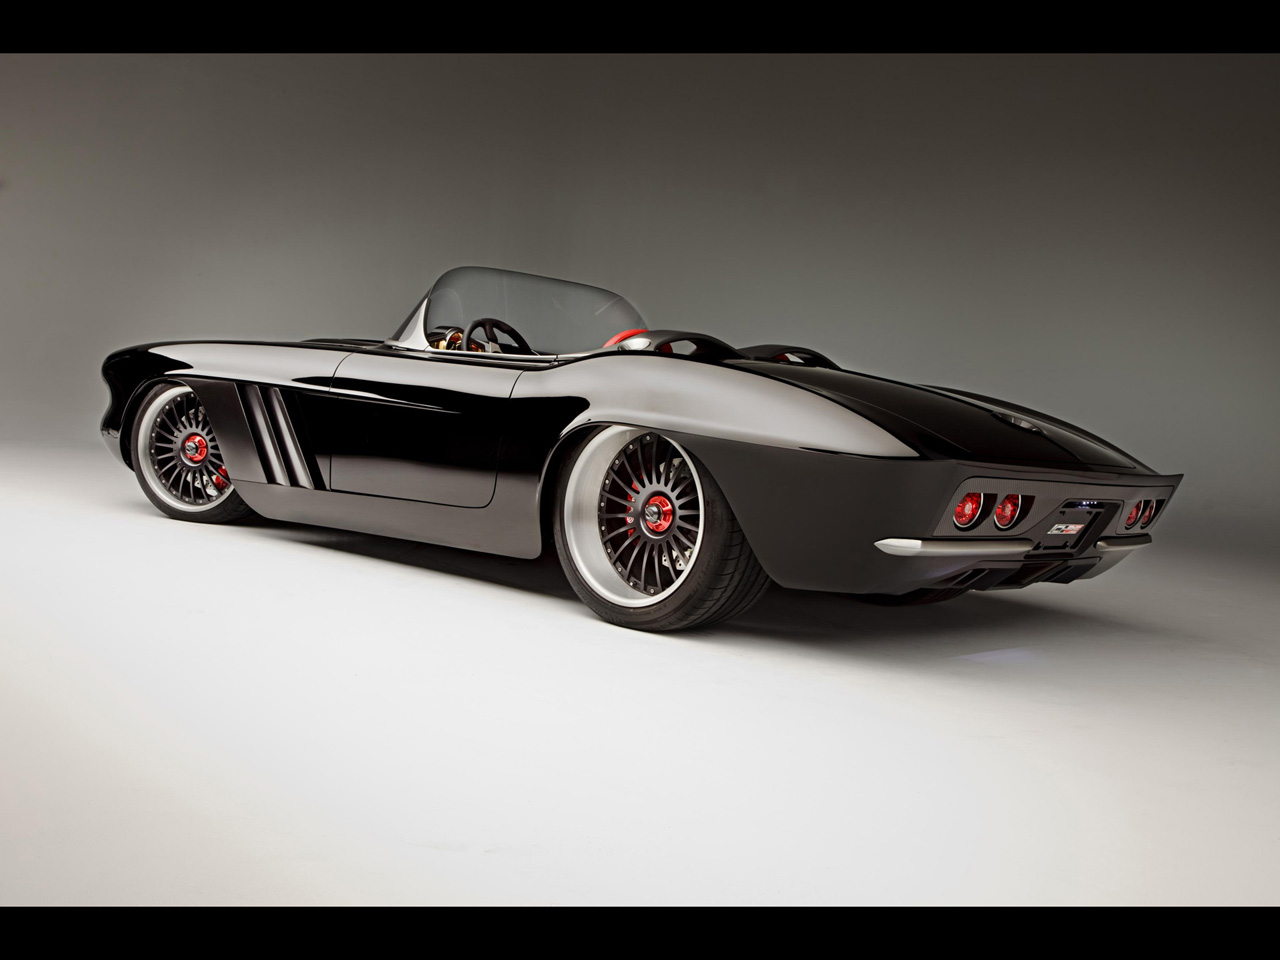 1962-Chevrolet-Corvette-C1-RS-by-Roadster-Shop-Rear-And-Side-1280x960.jpg